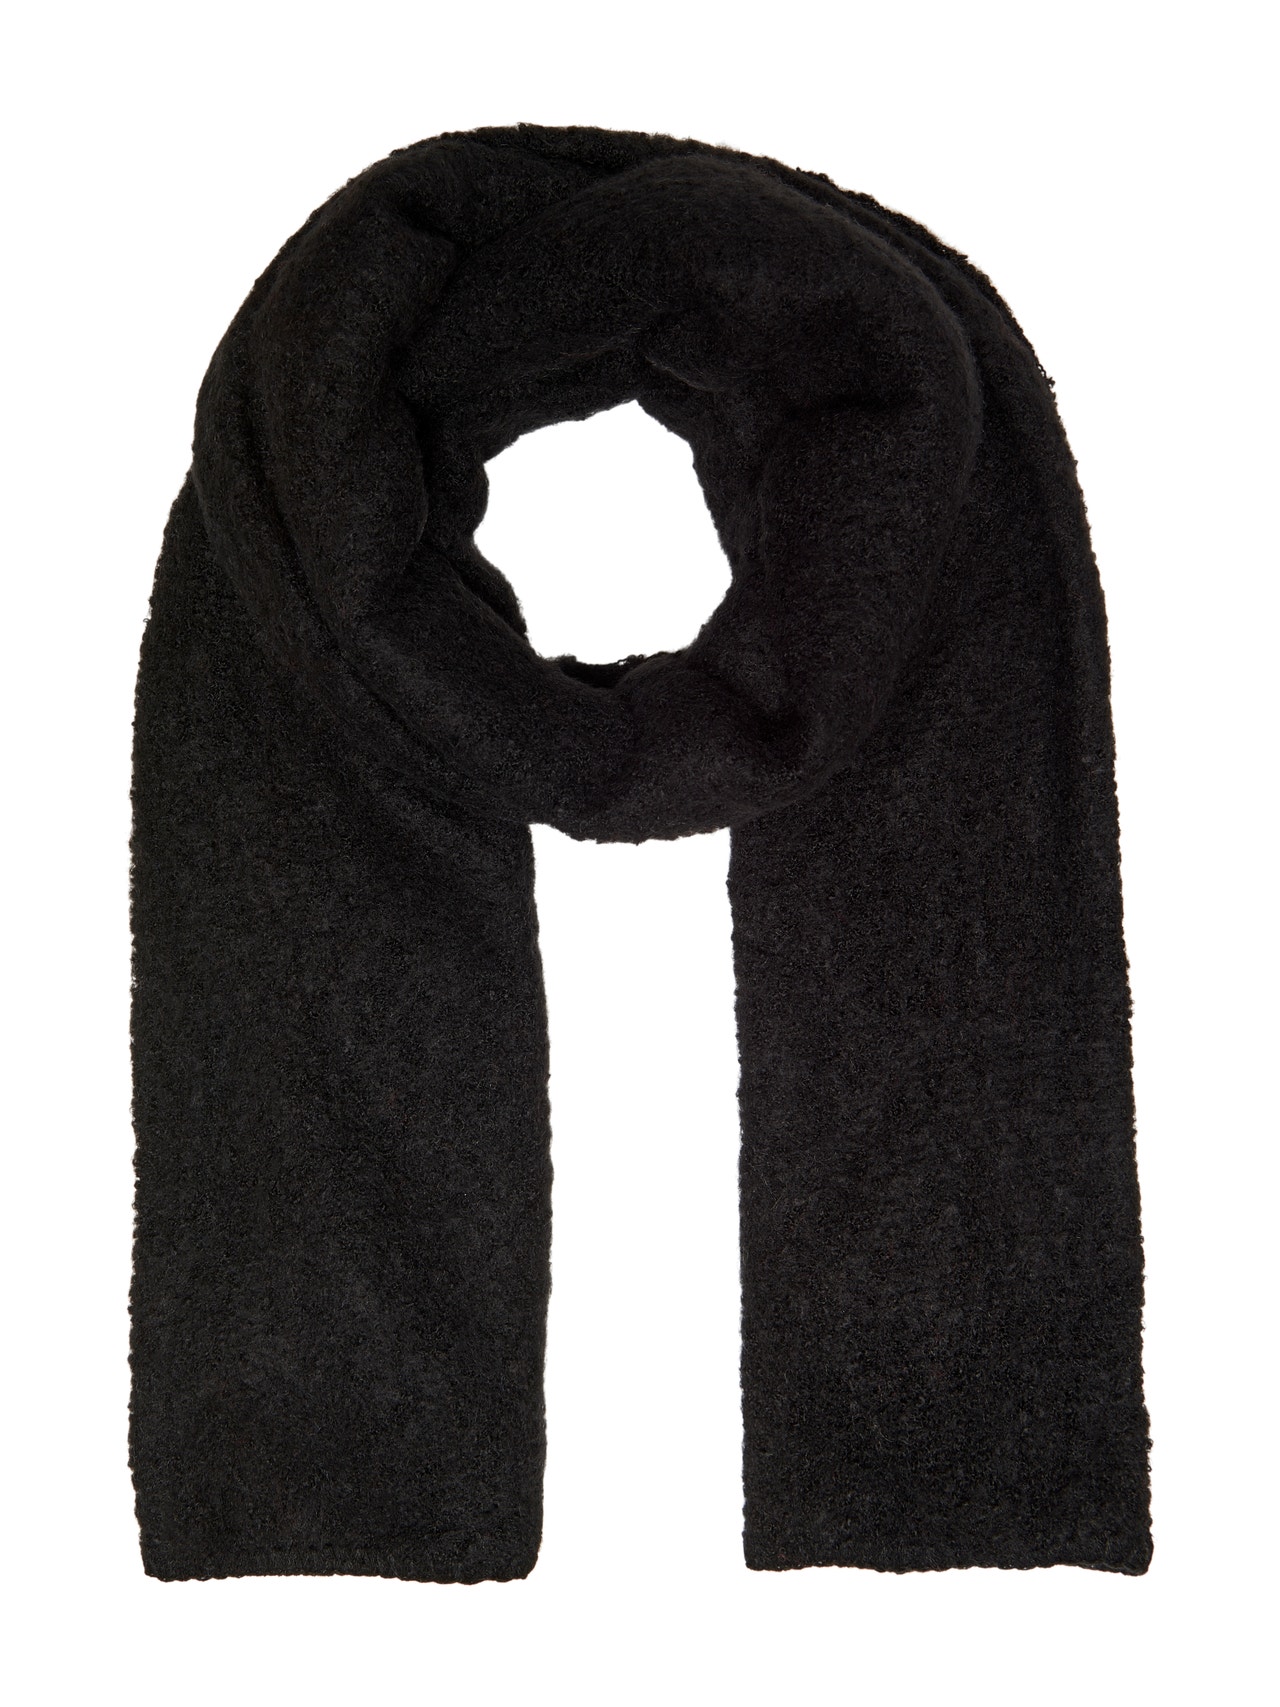 ONLY Scarf -Black - 15160602